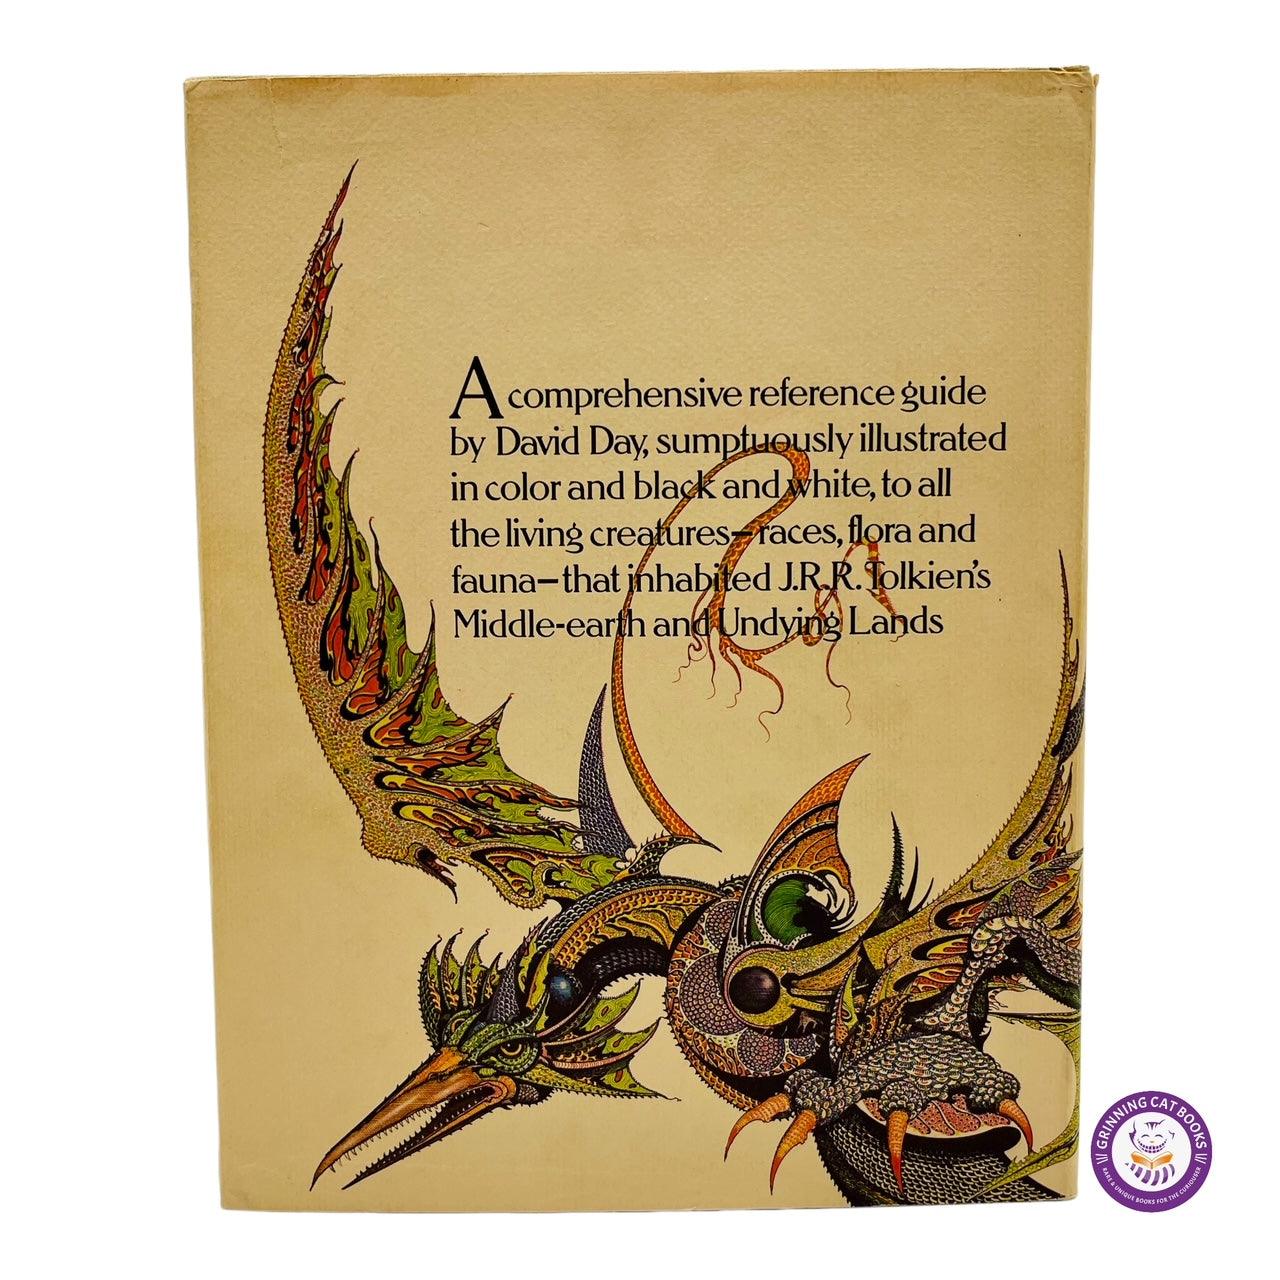 A Tolkien Bestiary - Grinning Cat Books - Books - ILLUSTRATED BOOKS, TOLKIEN